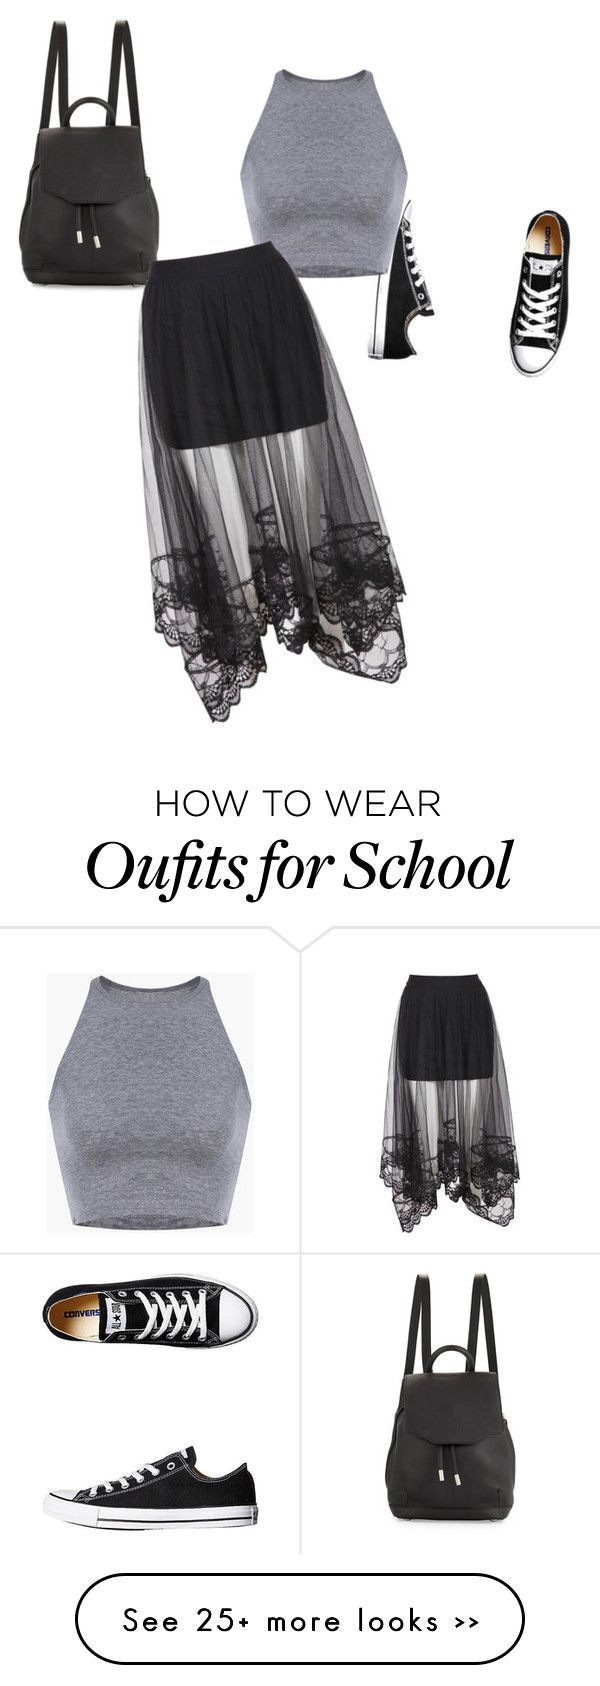 “School” by lexabloom on Polyvore featuring Converse and rag & bone